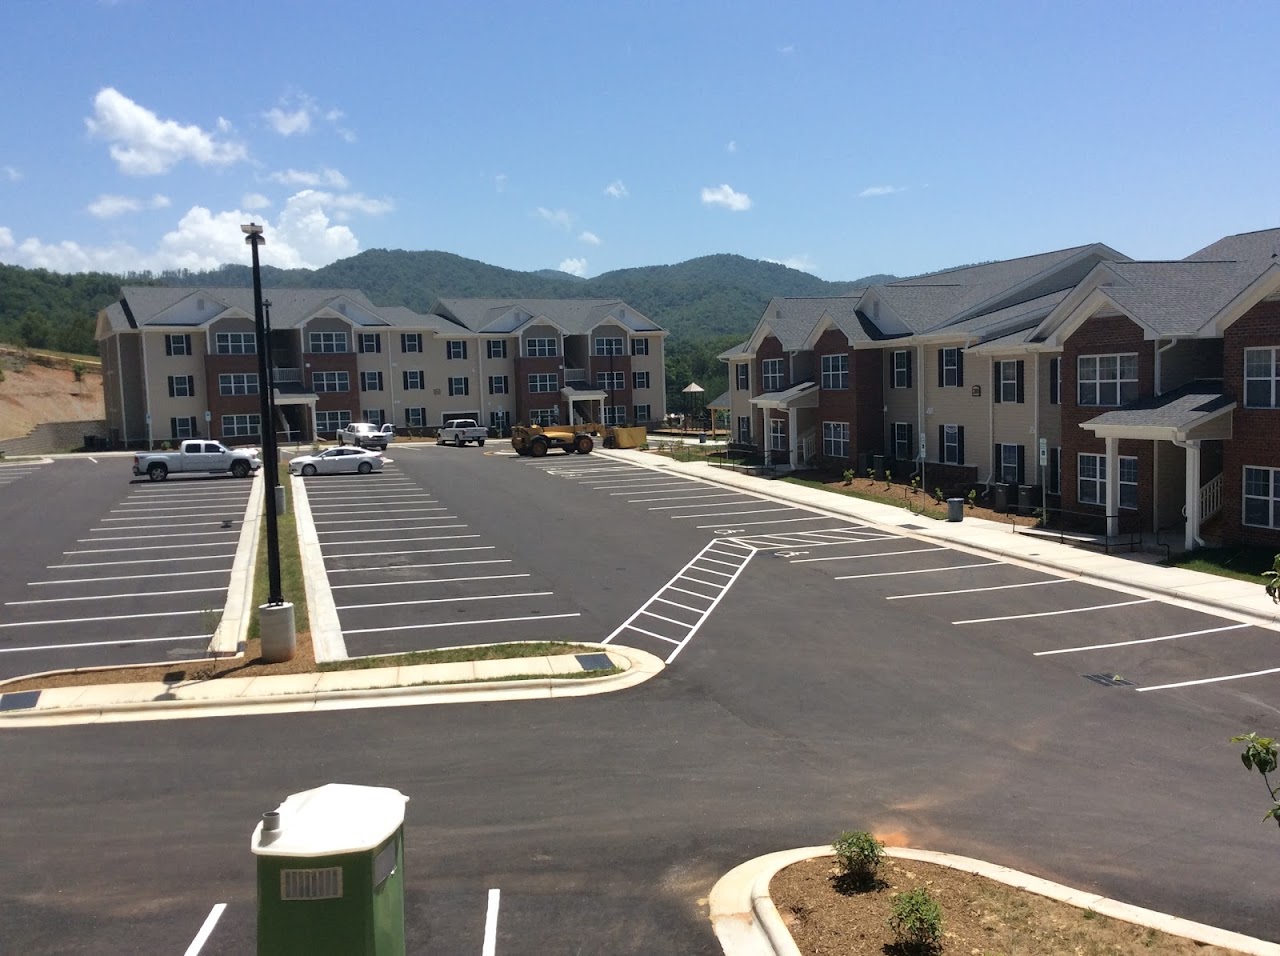 Photo of HIGH RIDGE. Affordable housing located at 200 WEST CONNOR ROAD SYLVA, NC 28779